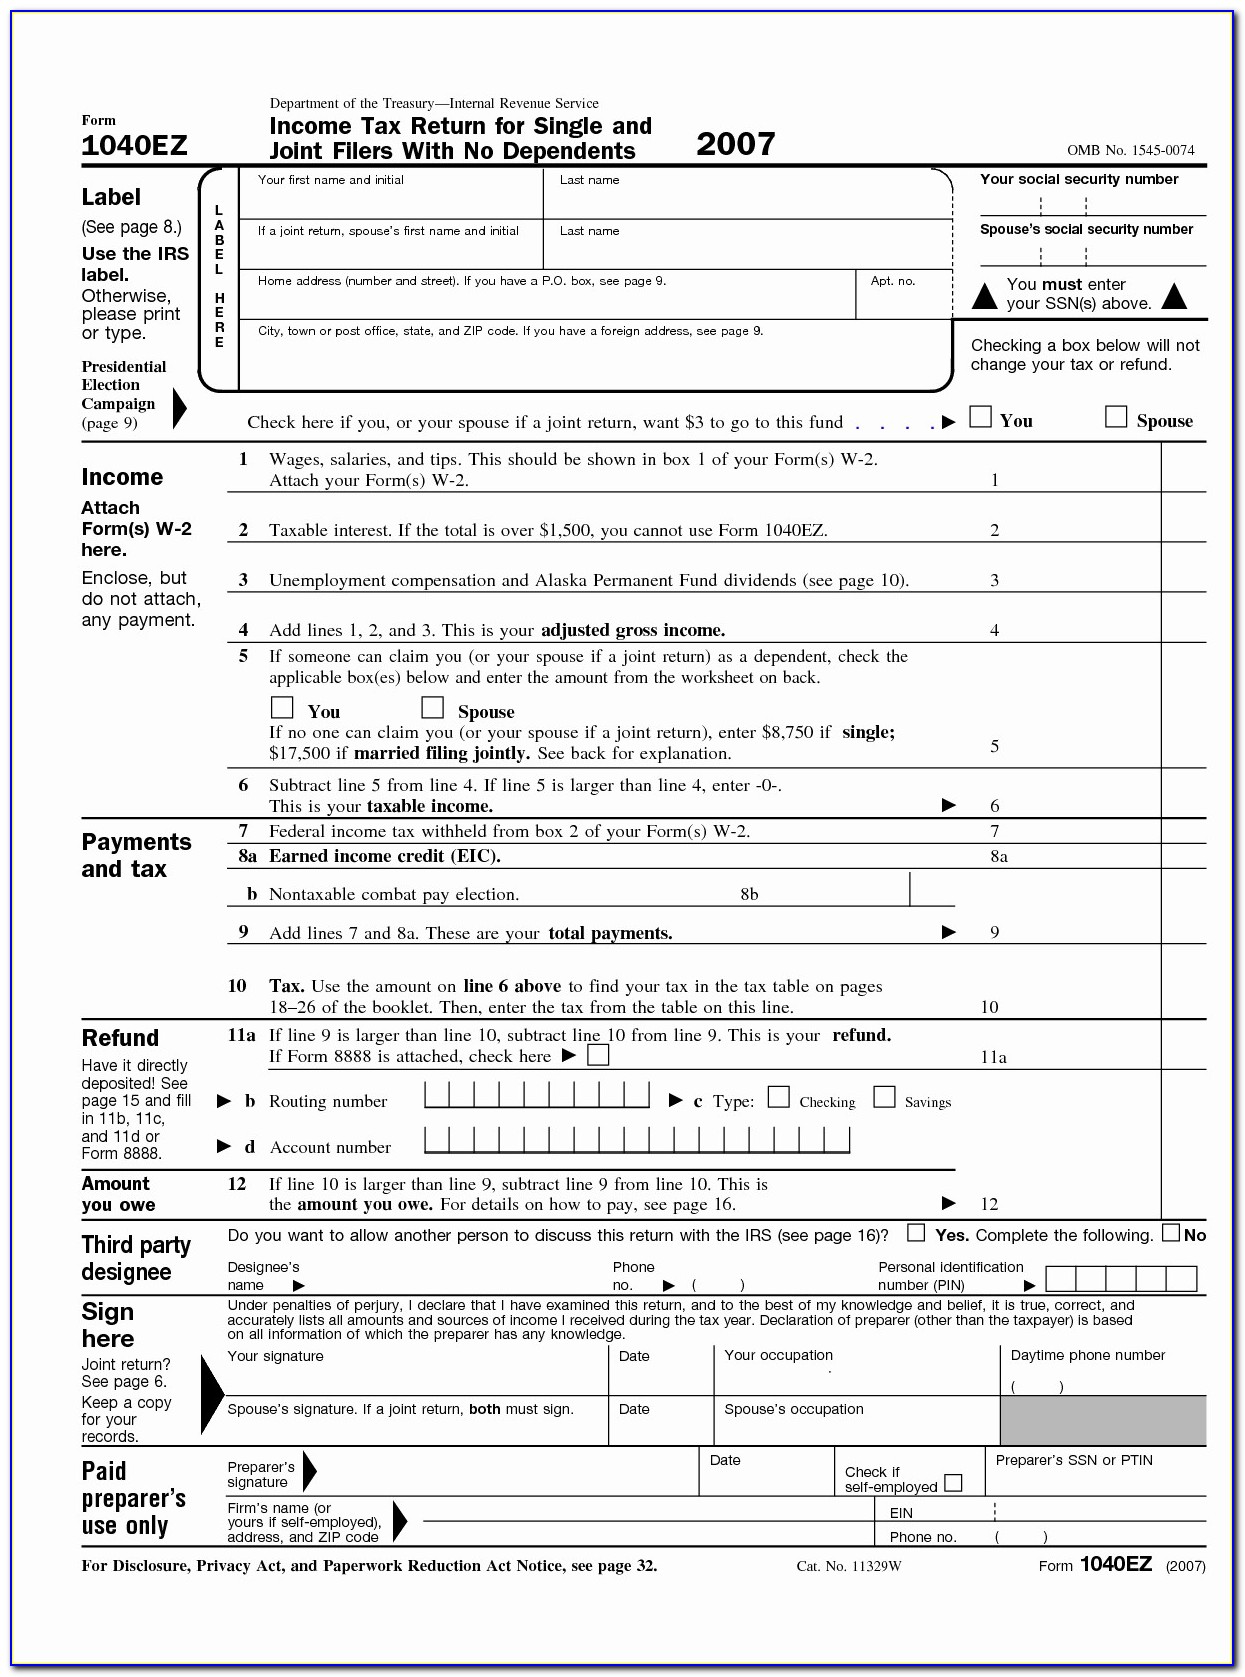 1040 E Form Printable Irs Form 1040ez Best 2015 1040 Tax Forms Choice Image Form